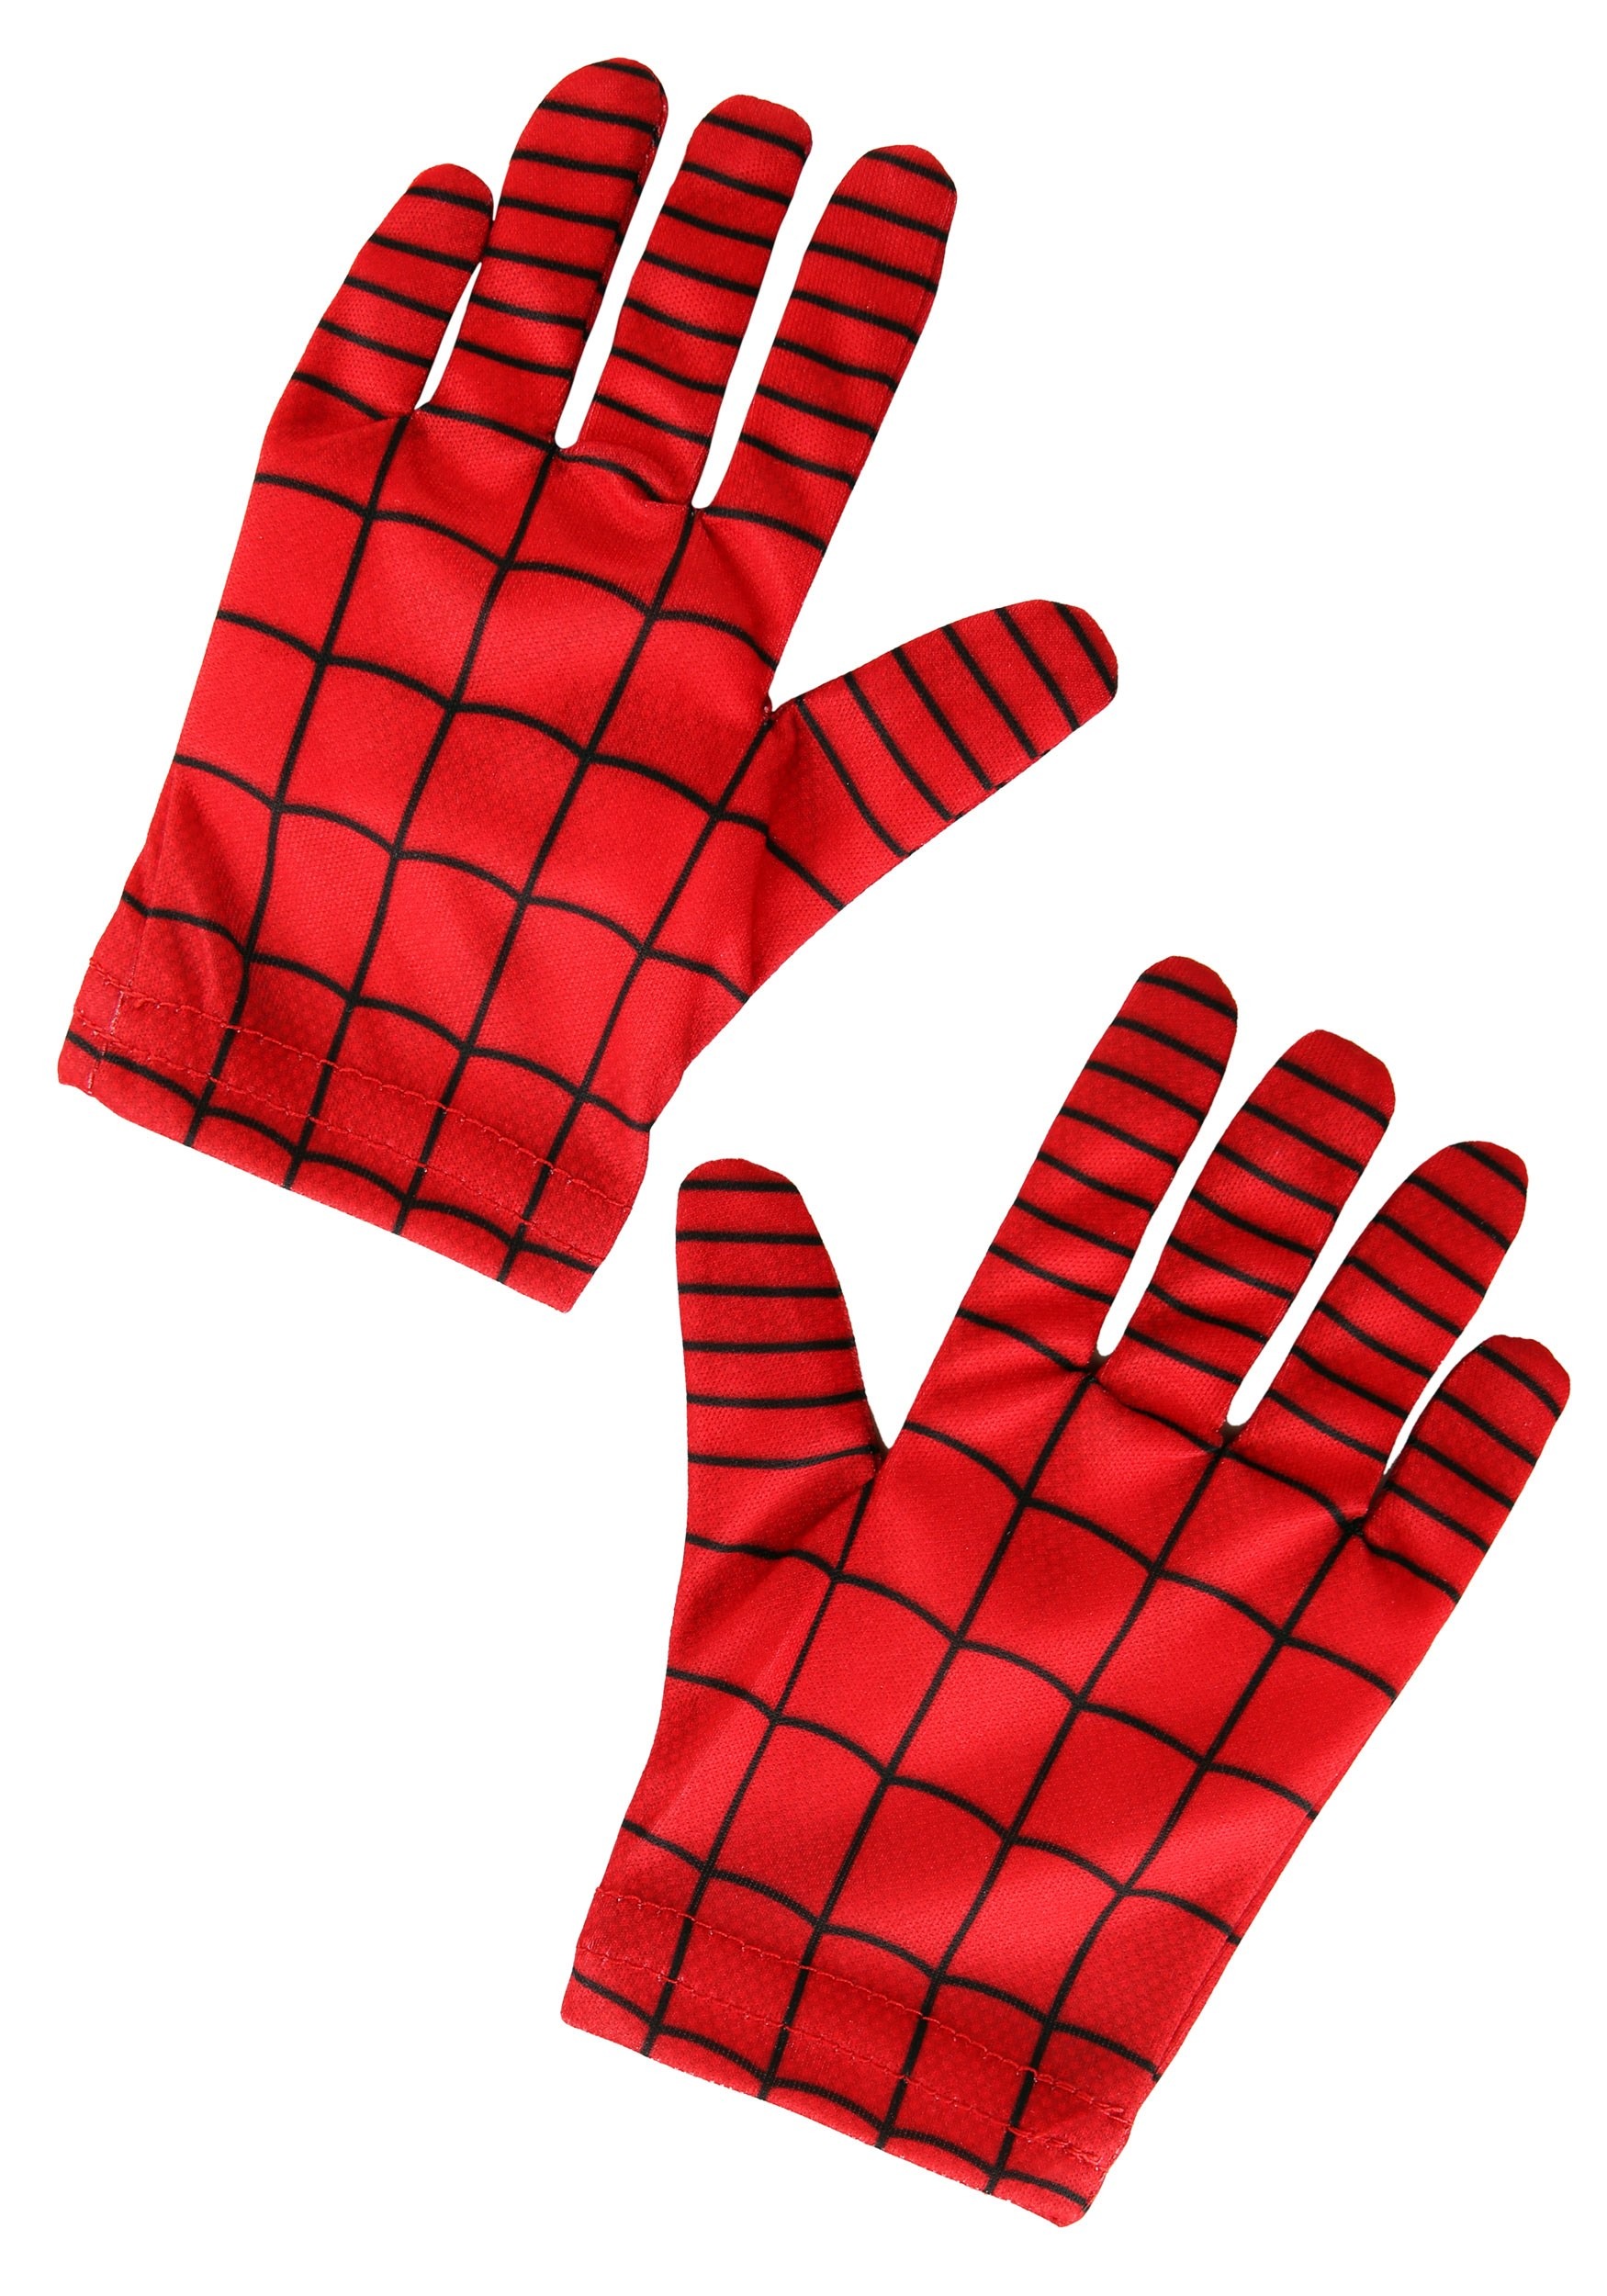 Kid's Spider-Man Far From Home Gloves 